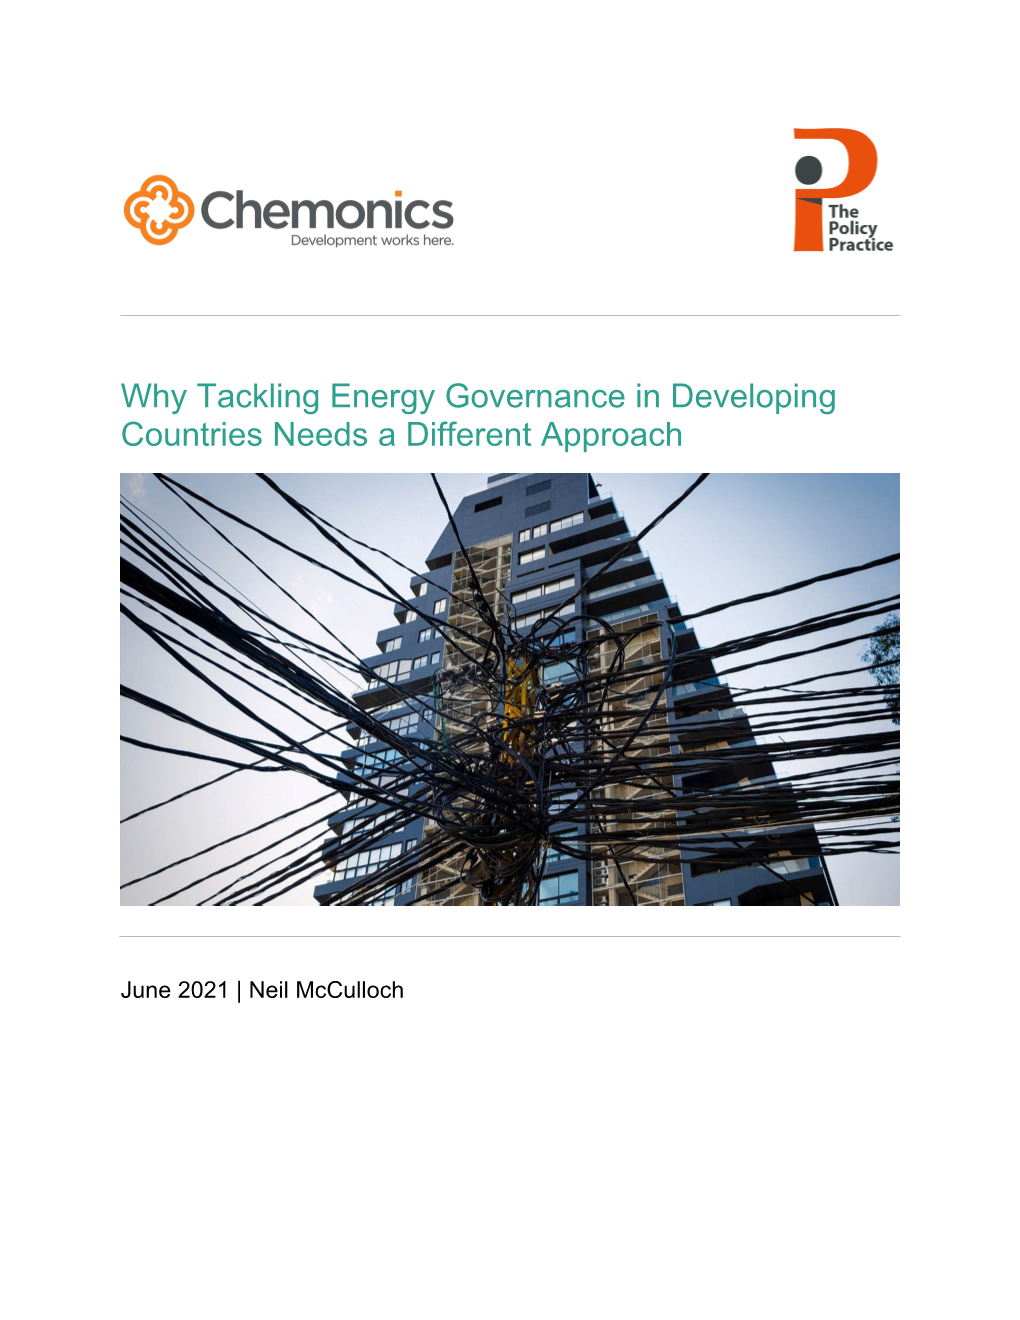 Why Tackling Energy Governance in Developing Countries Needs a Different Approach